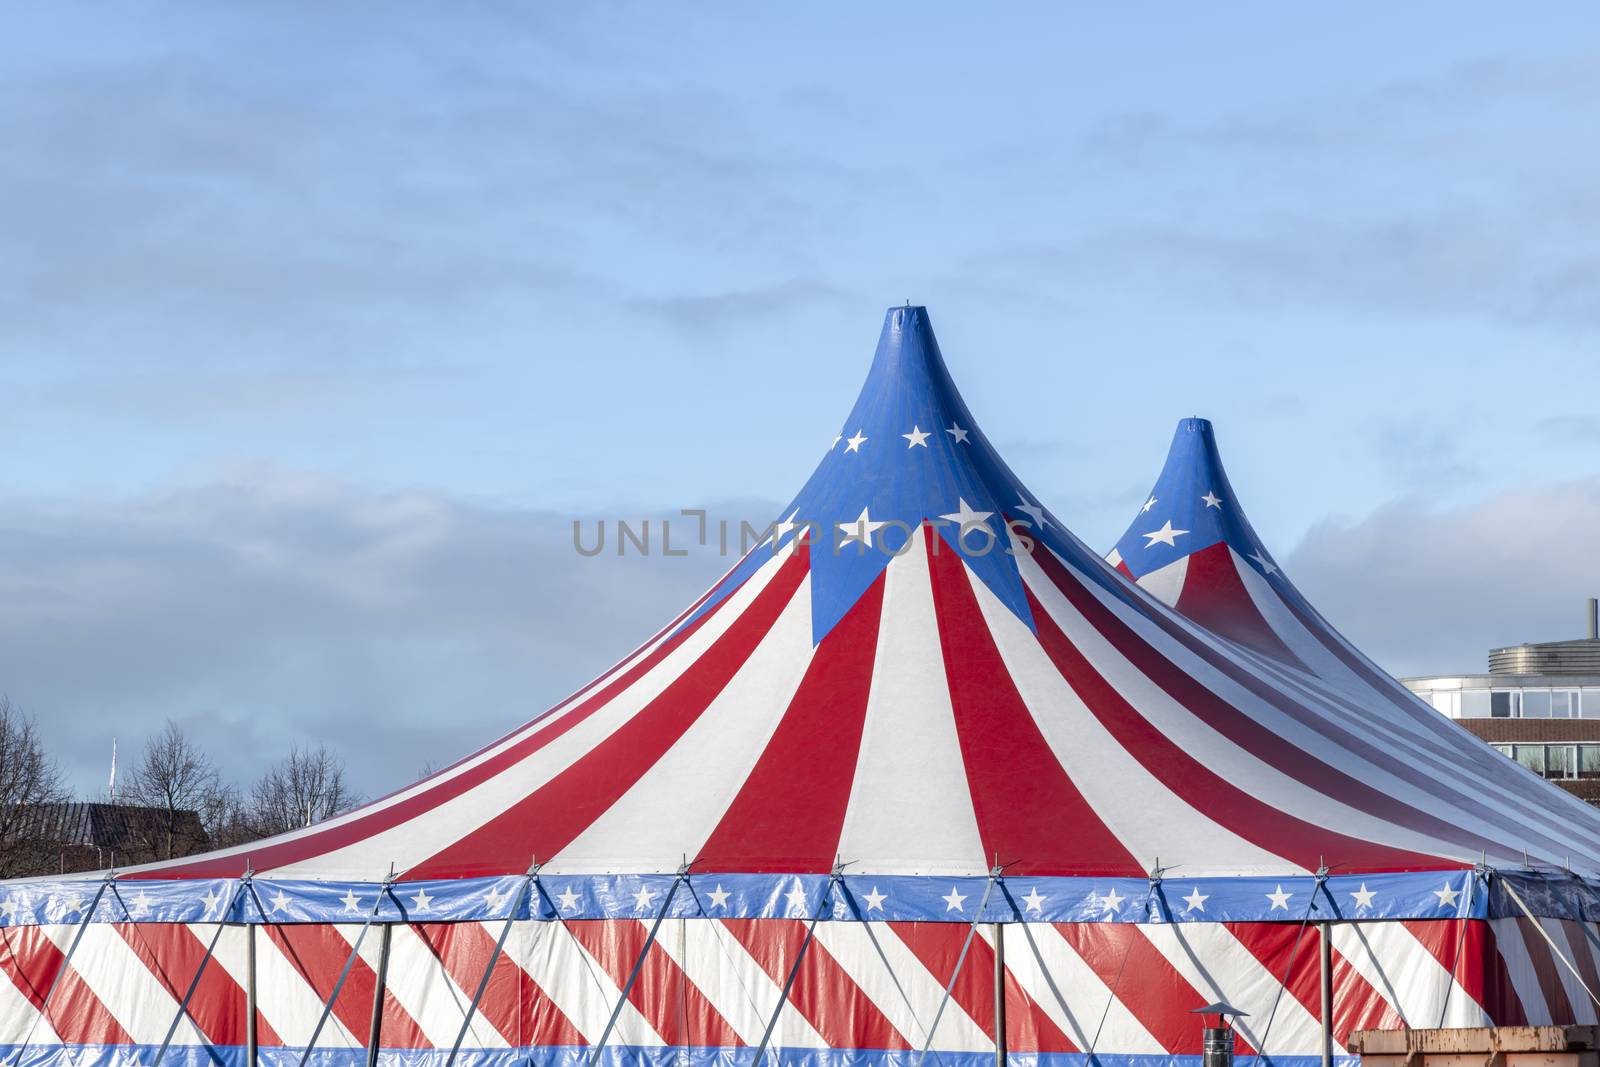 Red and white circus tent topped with bleu starred cover against a sunny blue sky with clouds by ankorlight